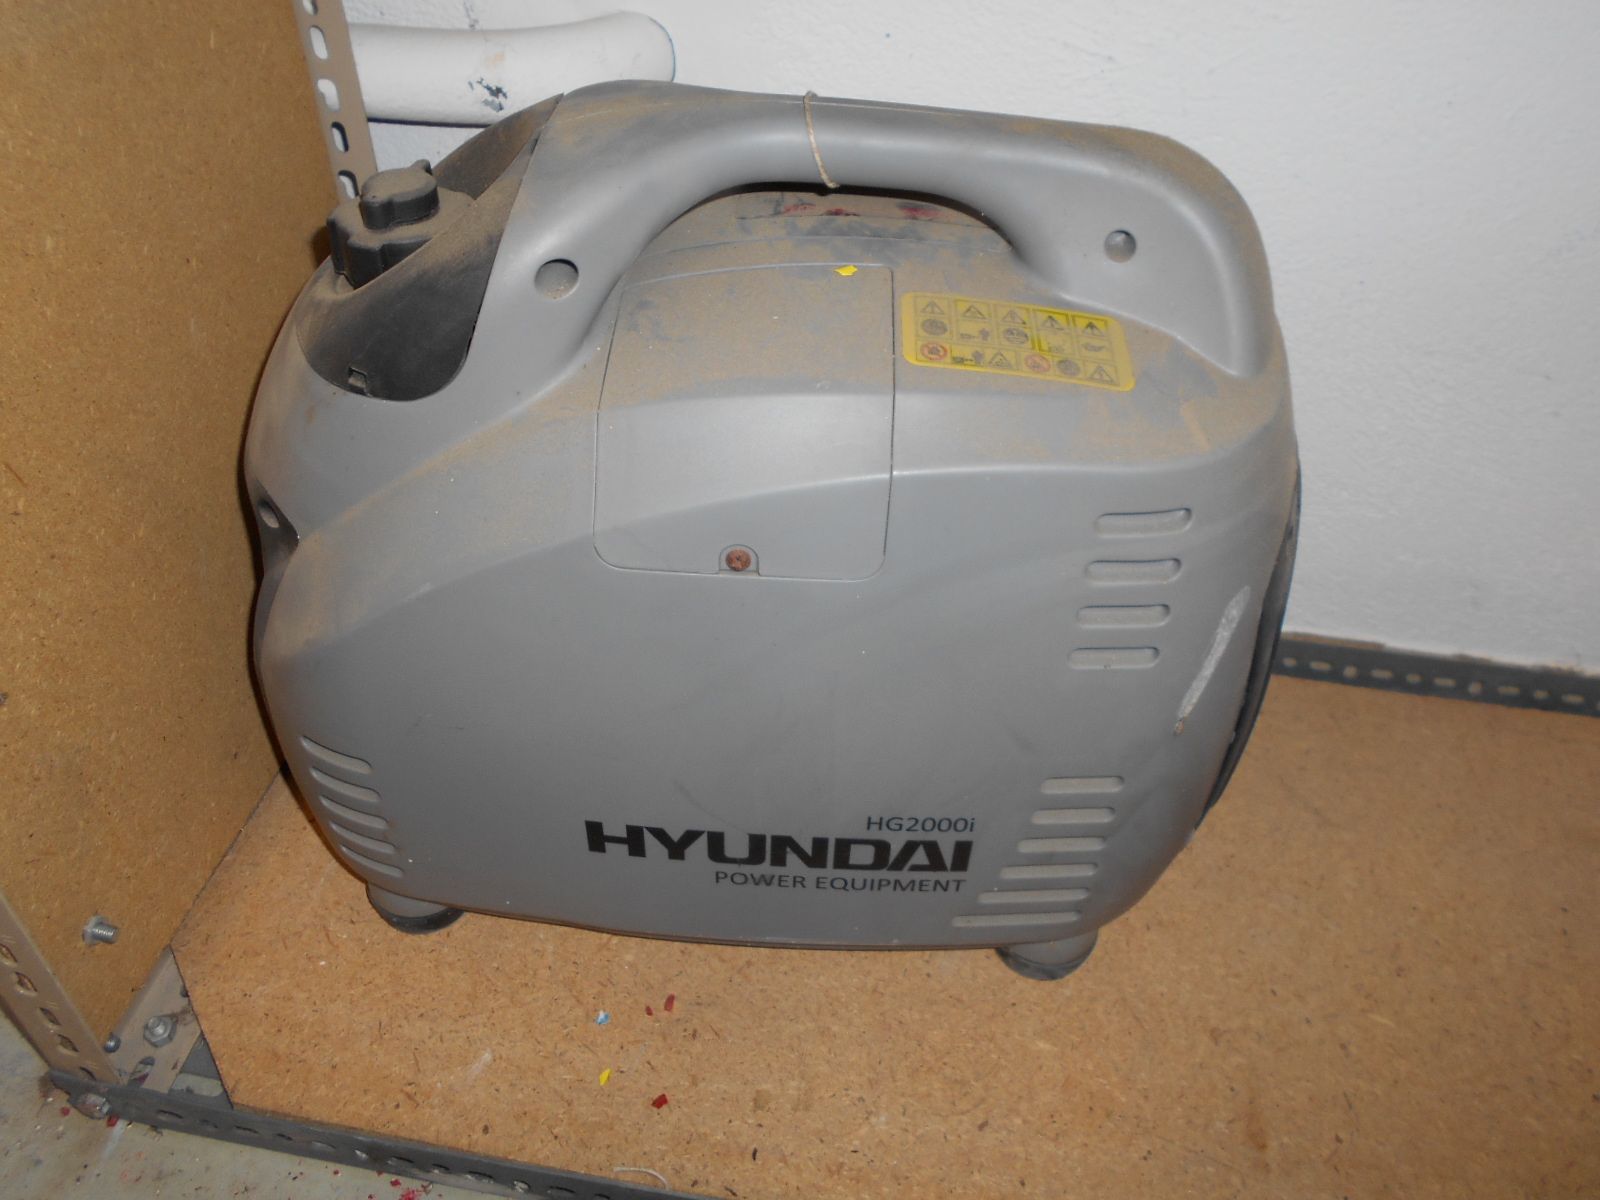 Null 1 HYUNDAI generator n° HG2000I. Sold as is.
 
 
 
Service remettant : JUDIC&hellip;